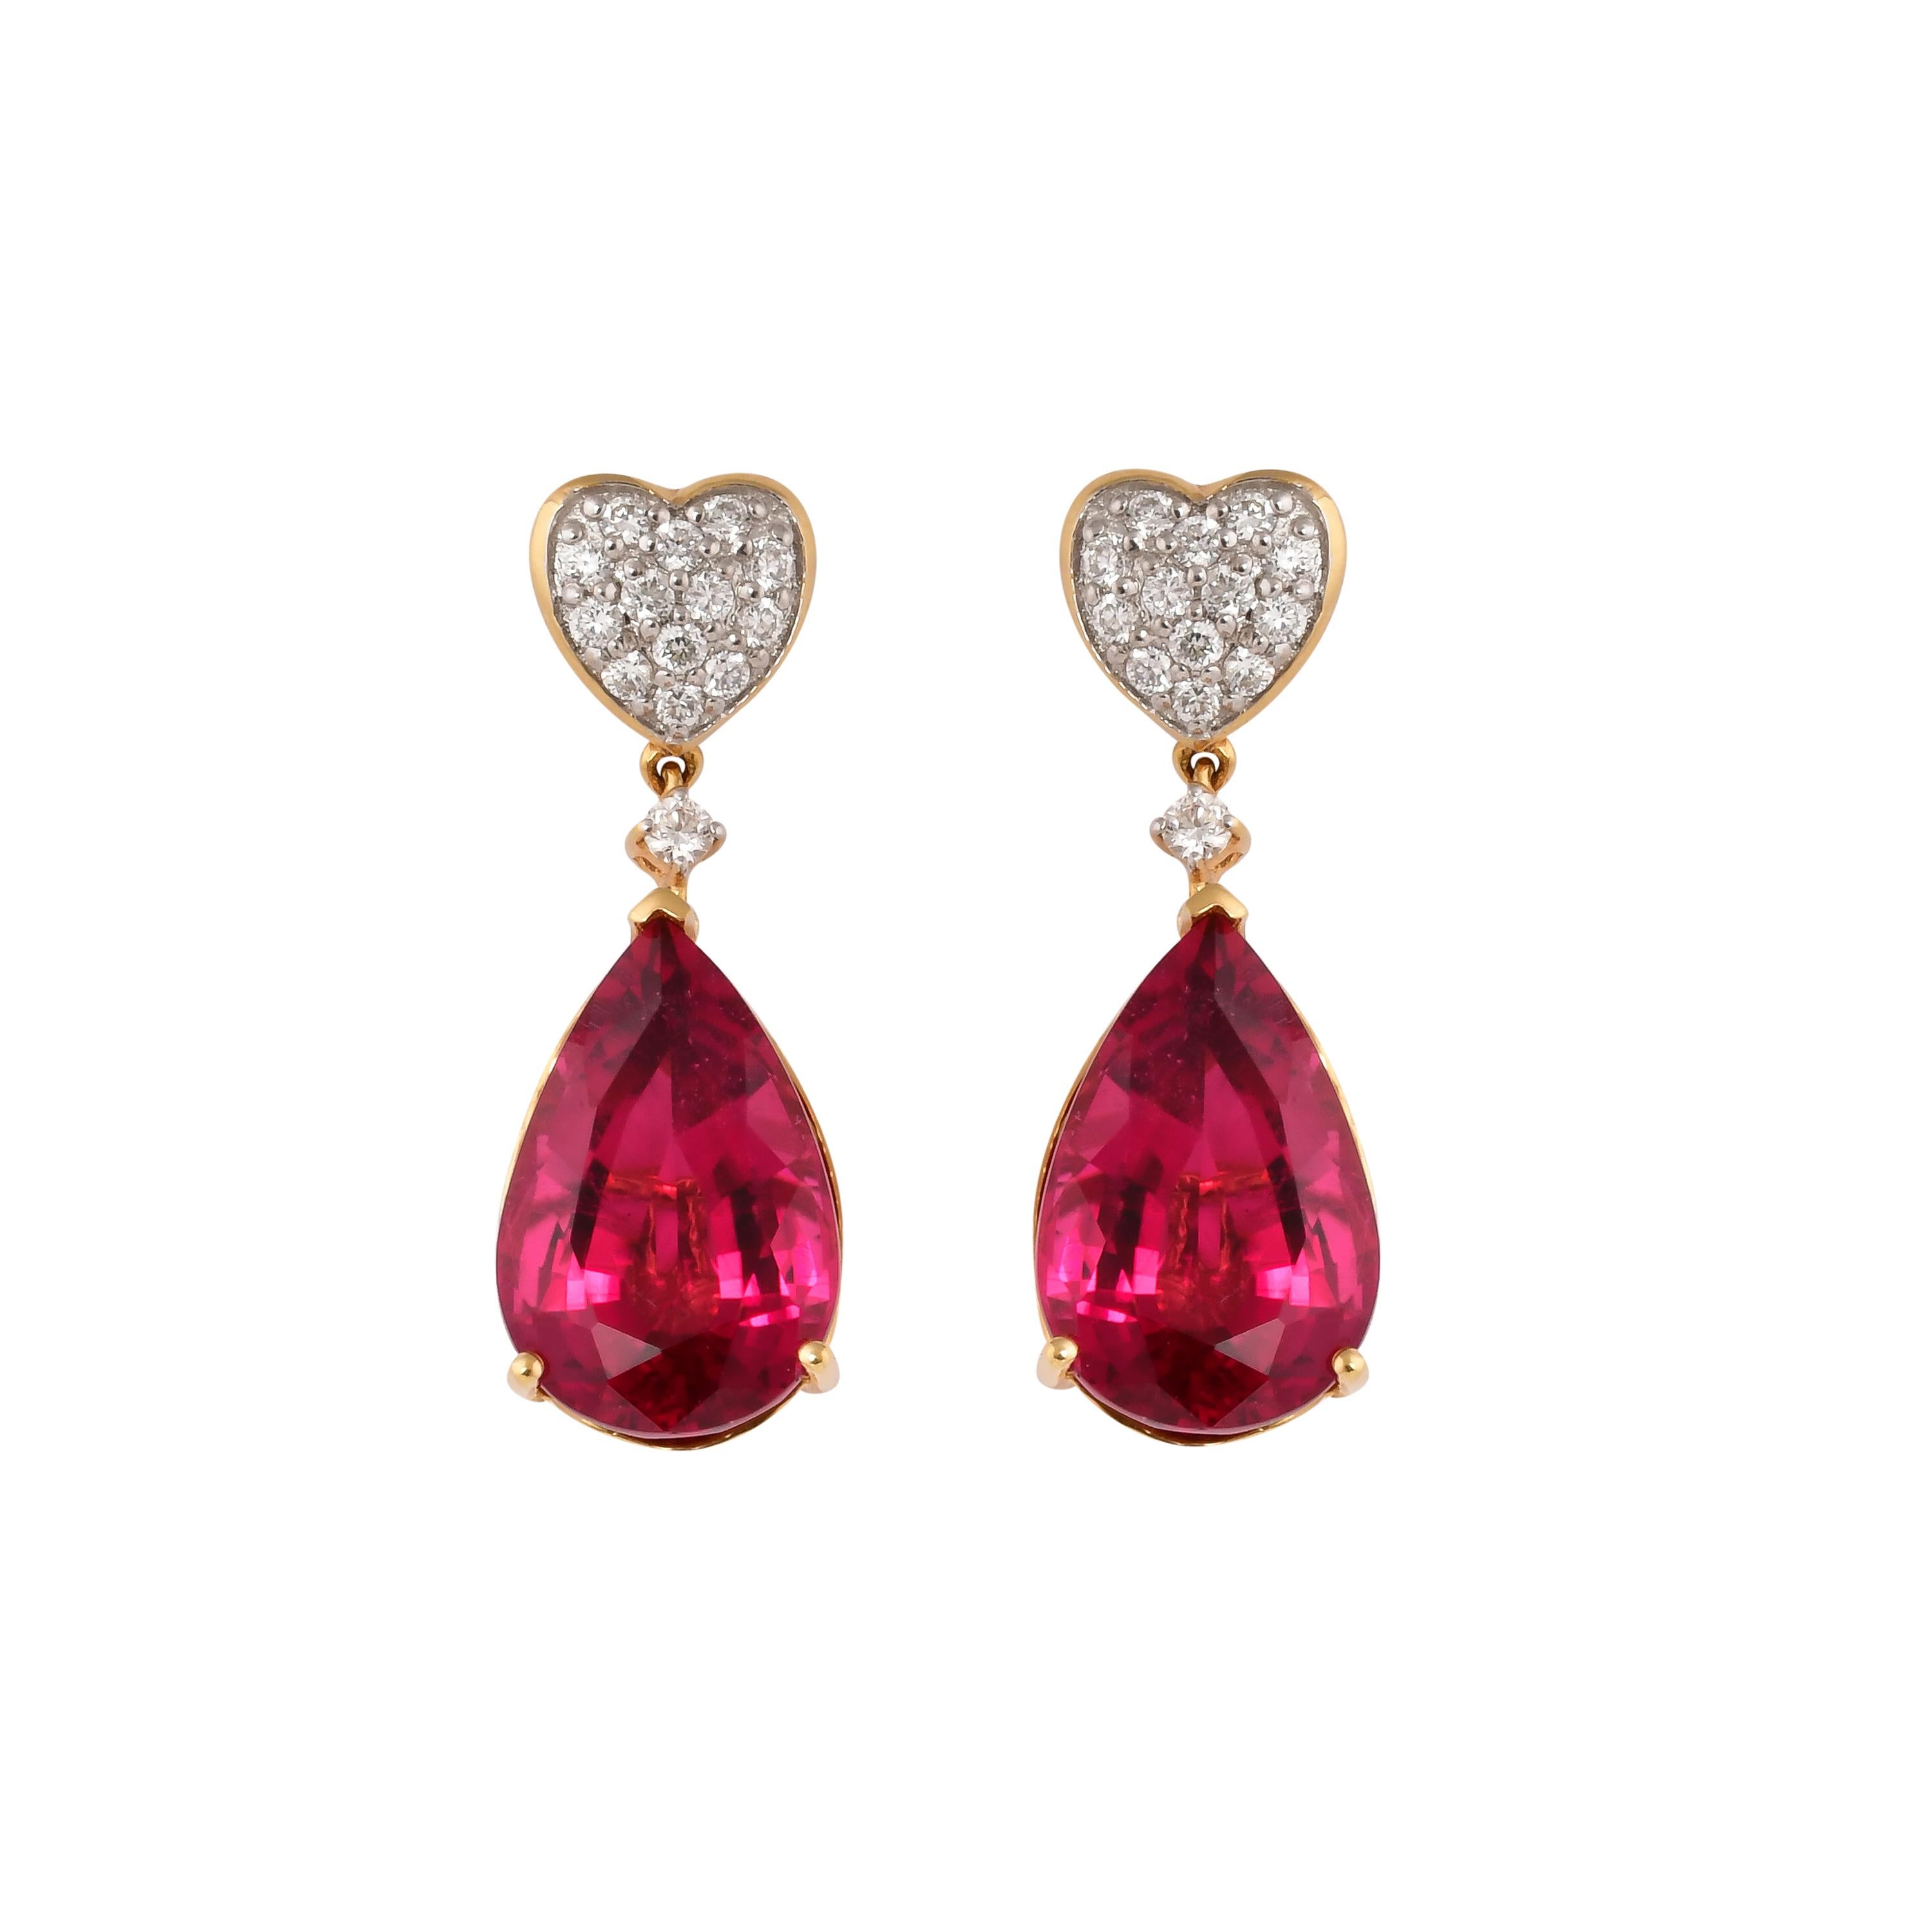 Contemporary 15.83 Carat Rubellite Tourmaline Earring with Diamond in 18 Karat Yellow Gold For Sale